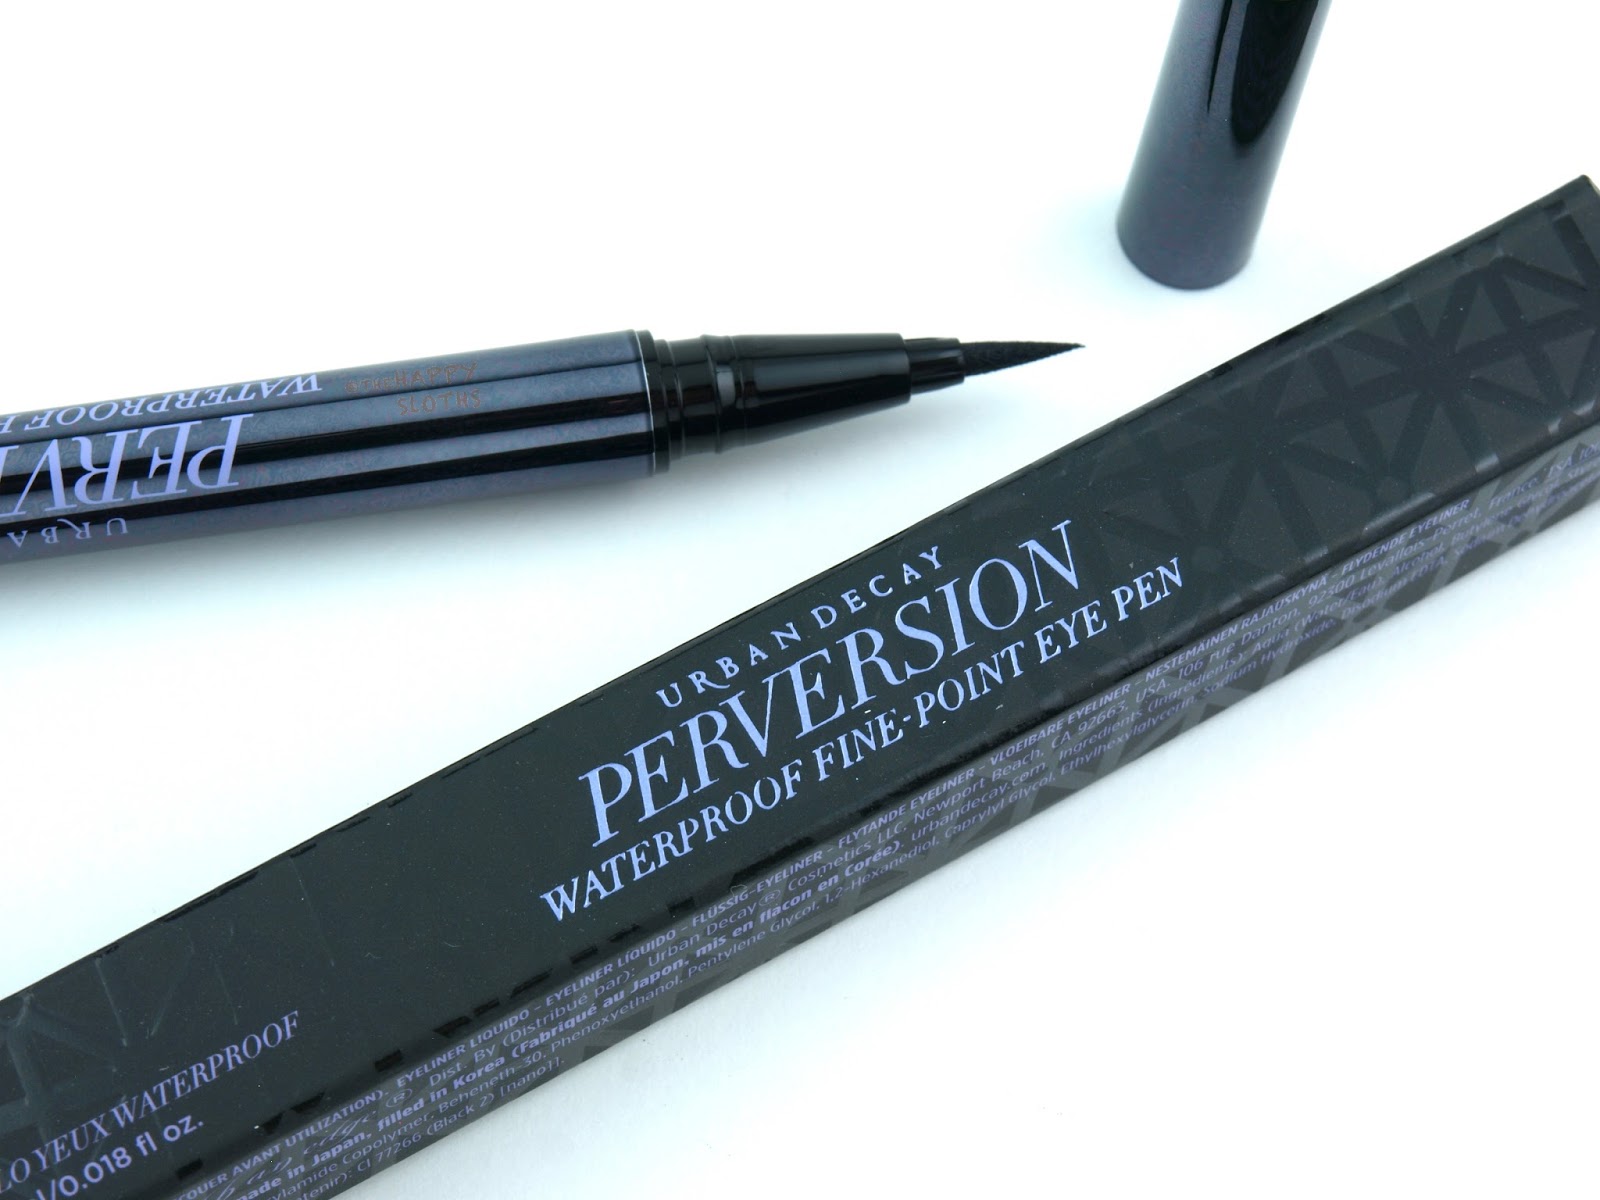 Urban Decay Perversion Waterproof Fine-Point Eye Pen: Review and Swatches | The Happy Sloths: Beauty, Makeup, and Skincare Blog with Reviews Swatches